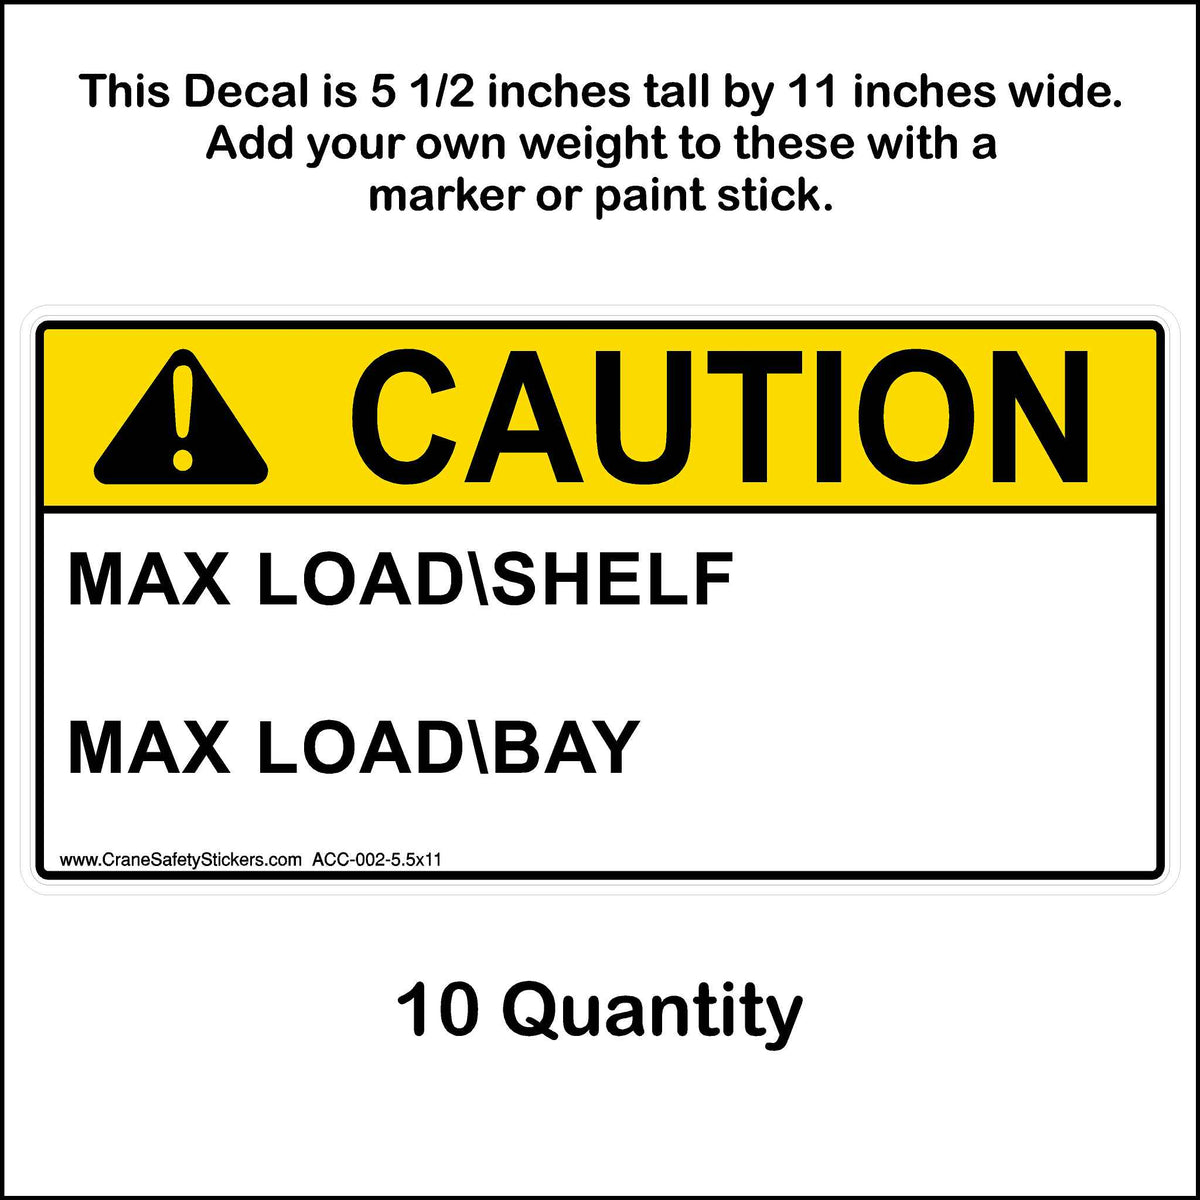 5 1/2 by 11 inch Max load shelf and max load bay sticker 10 quantity